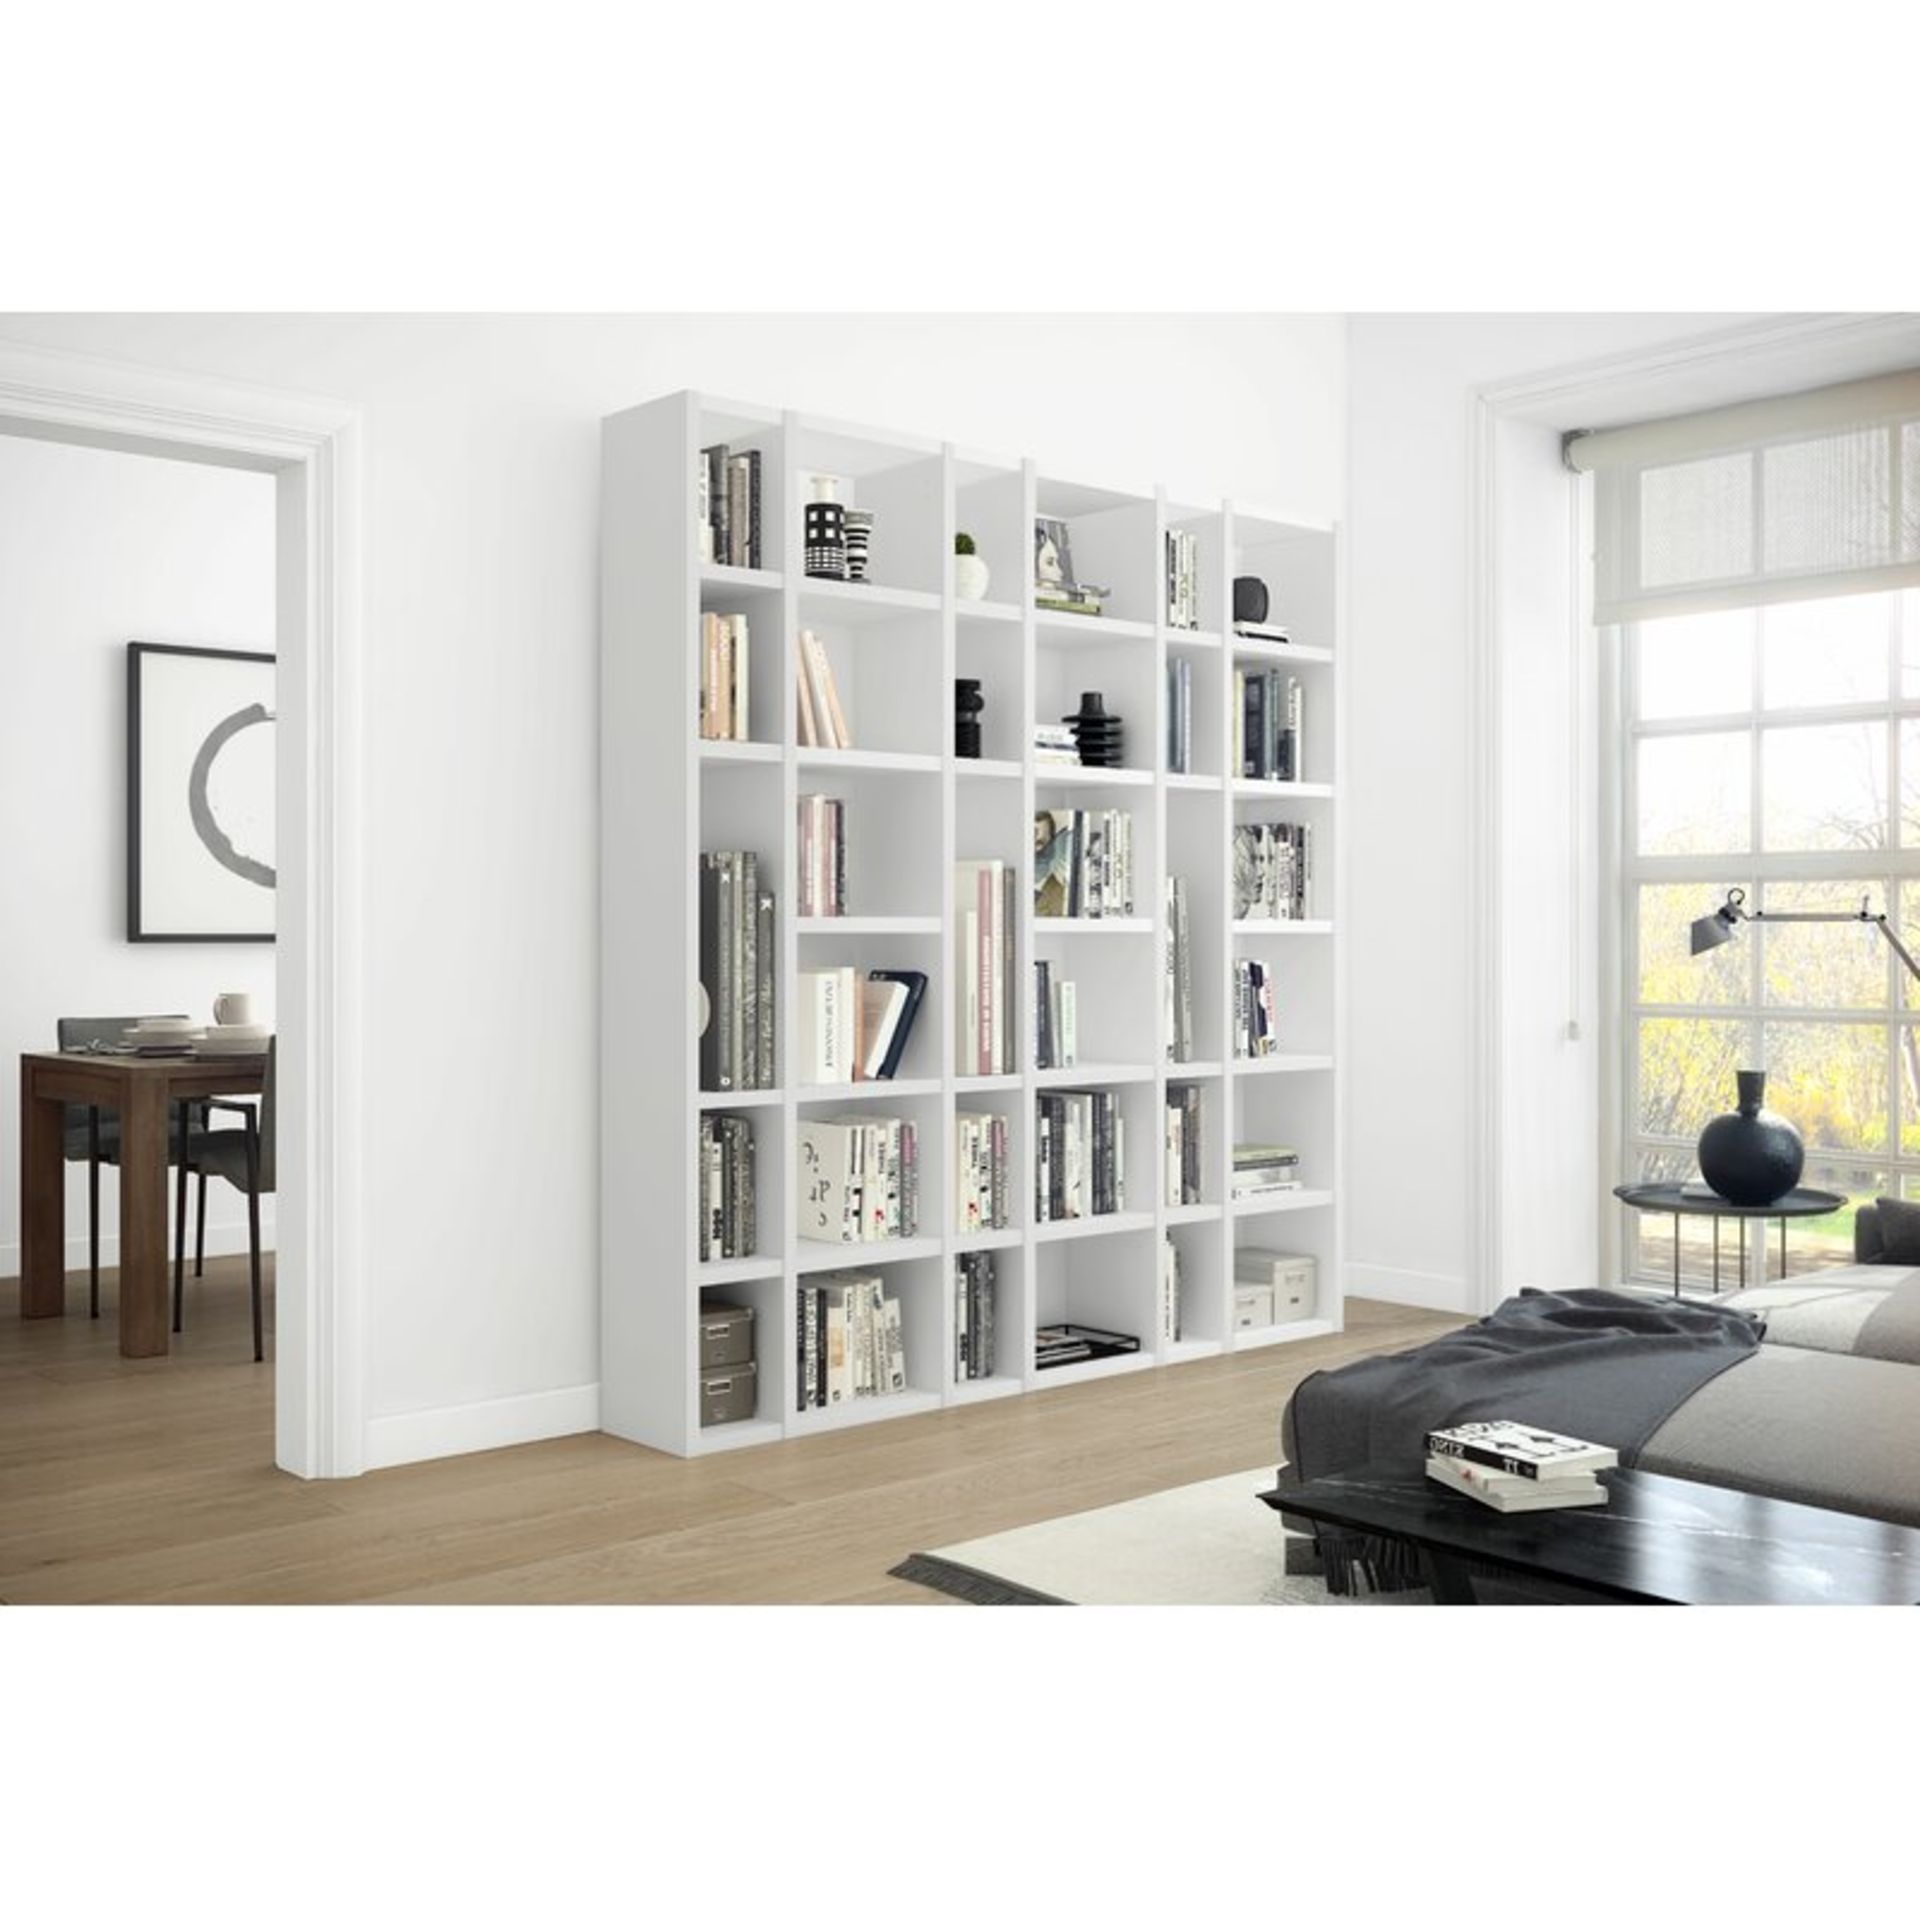 Jena fitted bookcase 6 packs 221.3cm height approx 220cm length